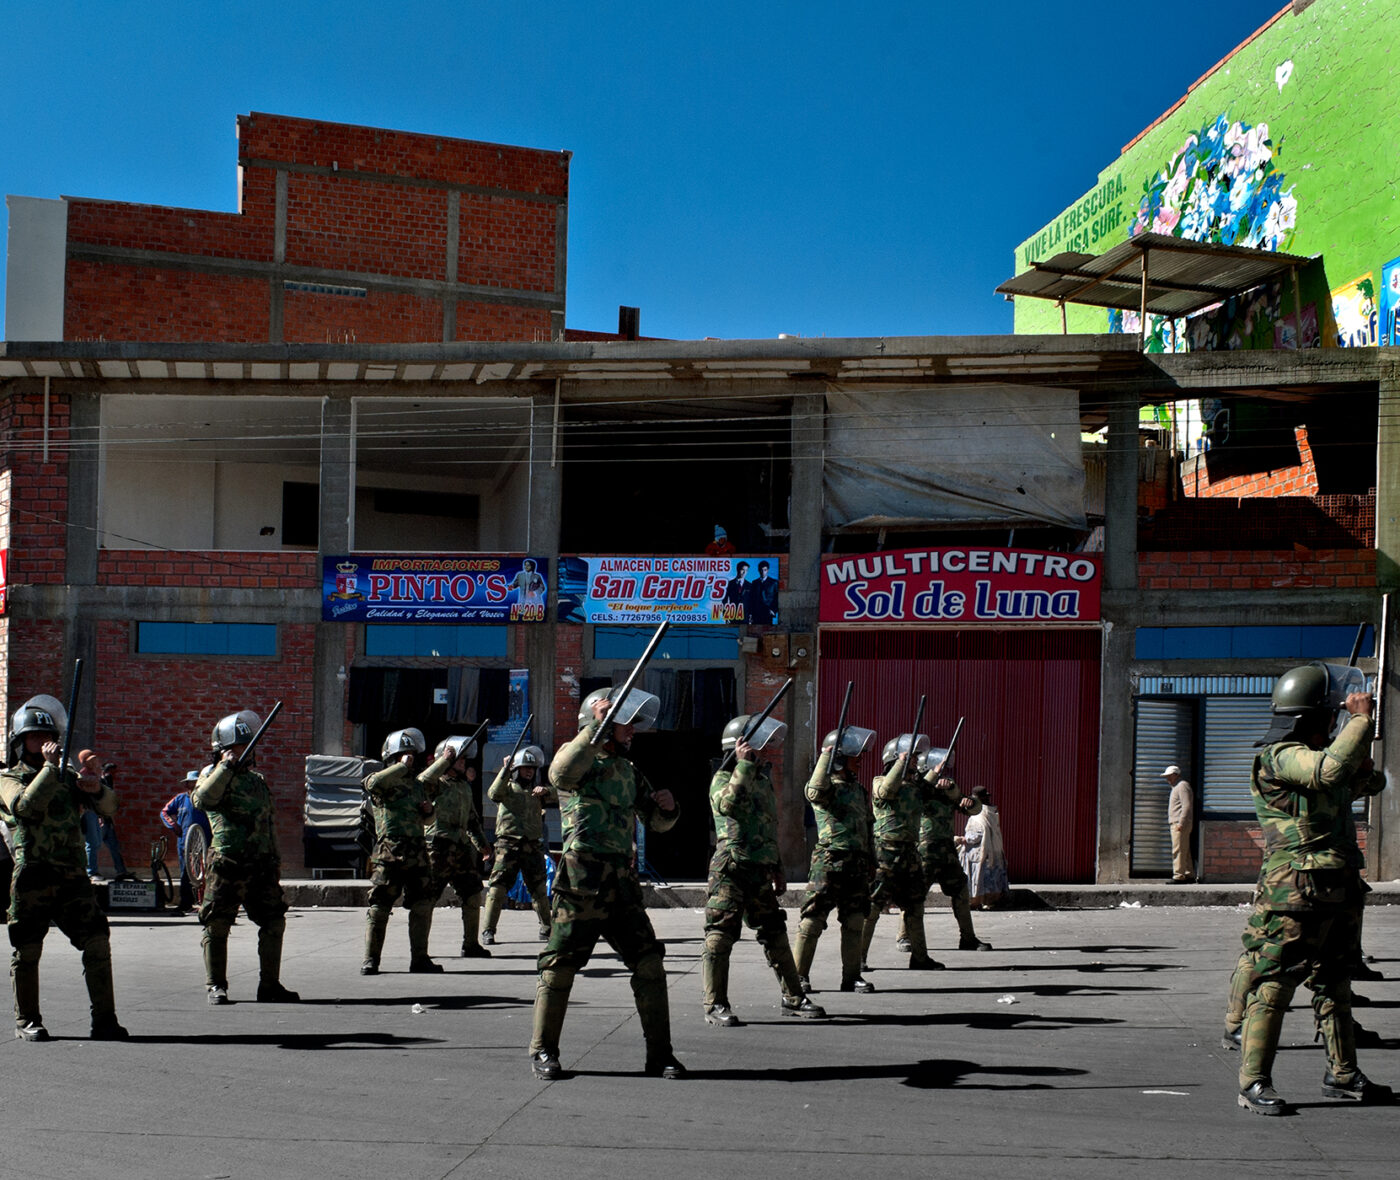 Soldiers stand on a street of colorful abandoned storefronts under a bright blue sky